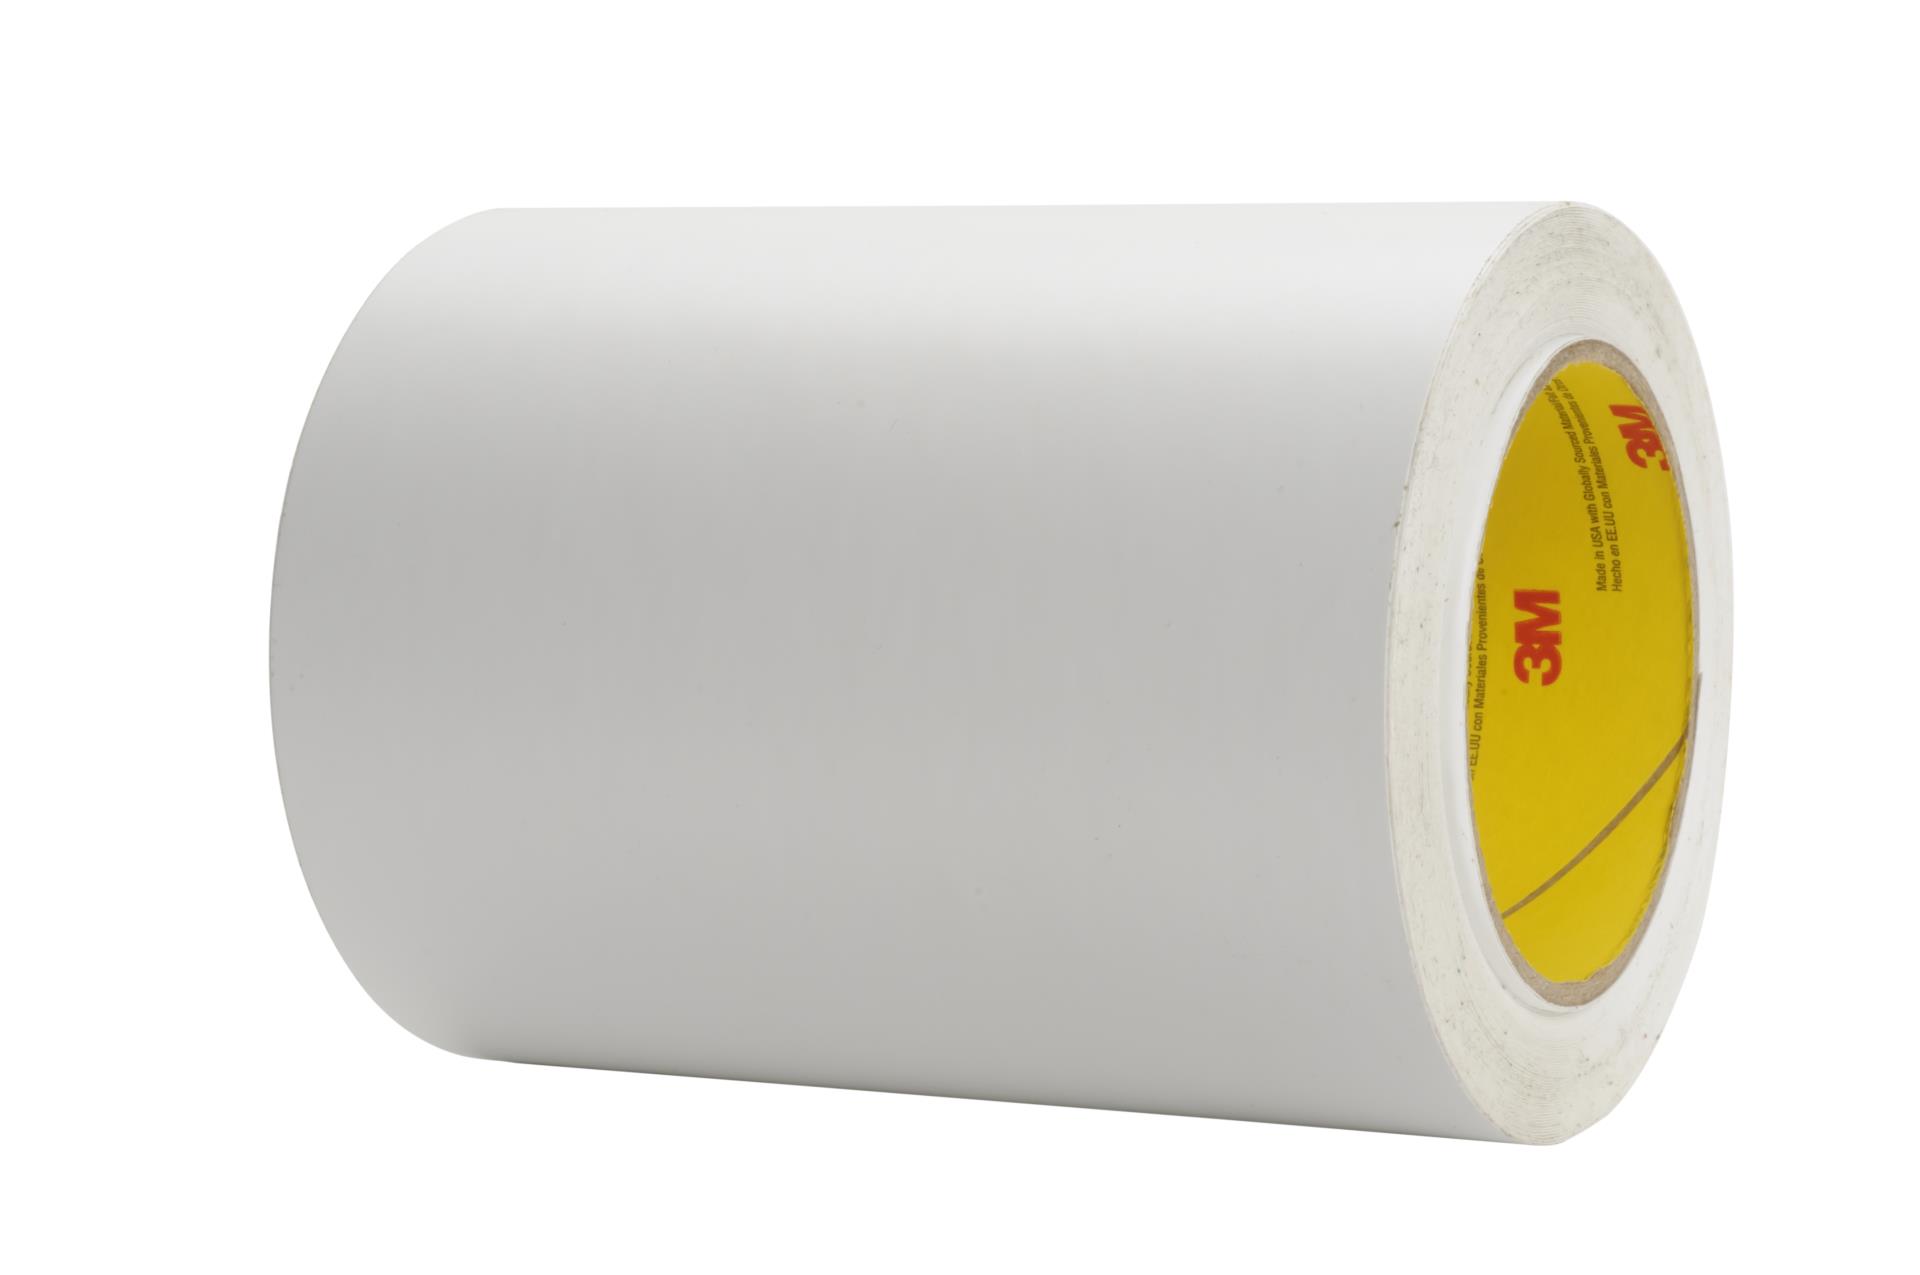 3M 361 0.188 x 60yd White Glass Cloth/Silicone Adhesive Electrical Tape 0.188 Width 0.188 Width 3M 361 0.188 x 60yd -65 degrees F to 450 degrees F 60 yd Length 